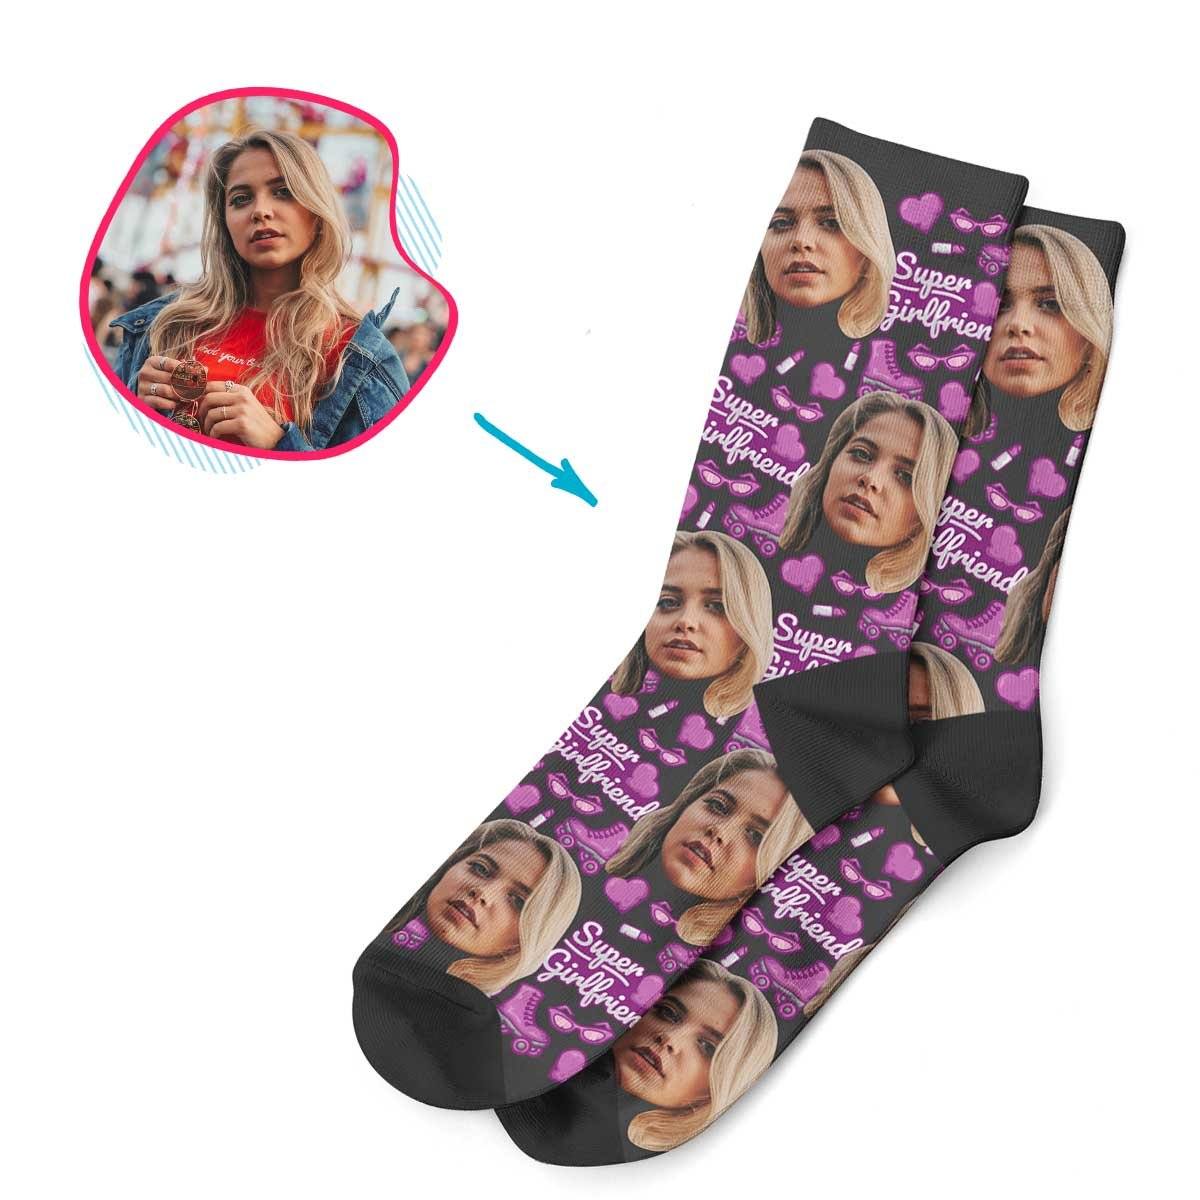 Dark Girlfriend personalized socks with photo of face printed on them